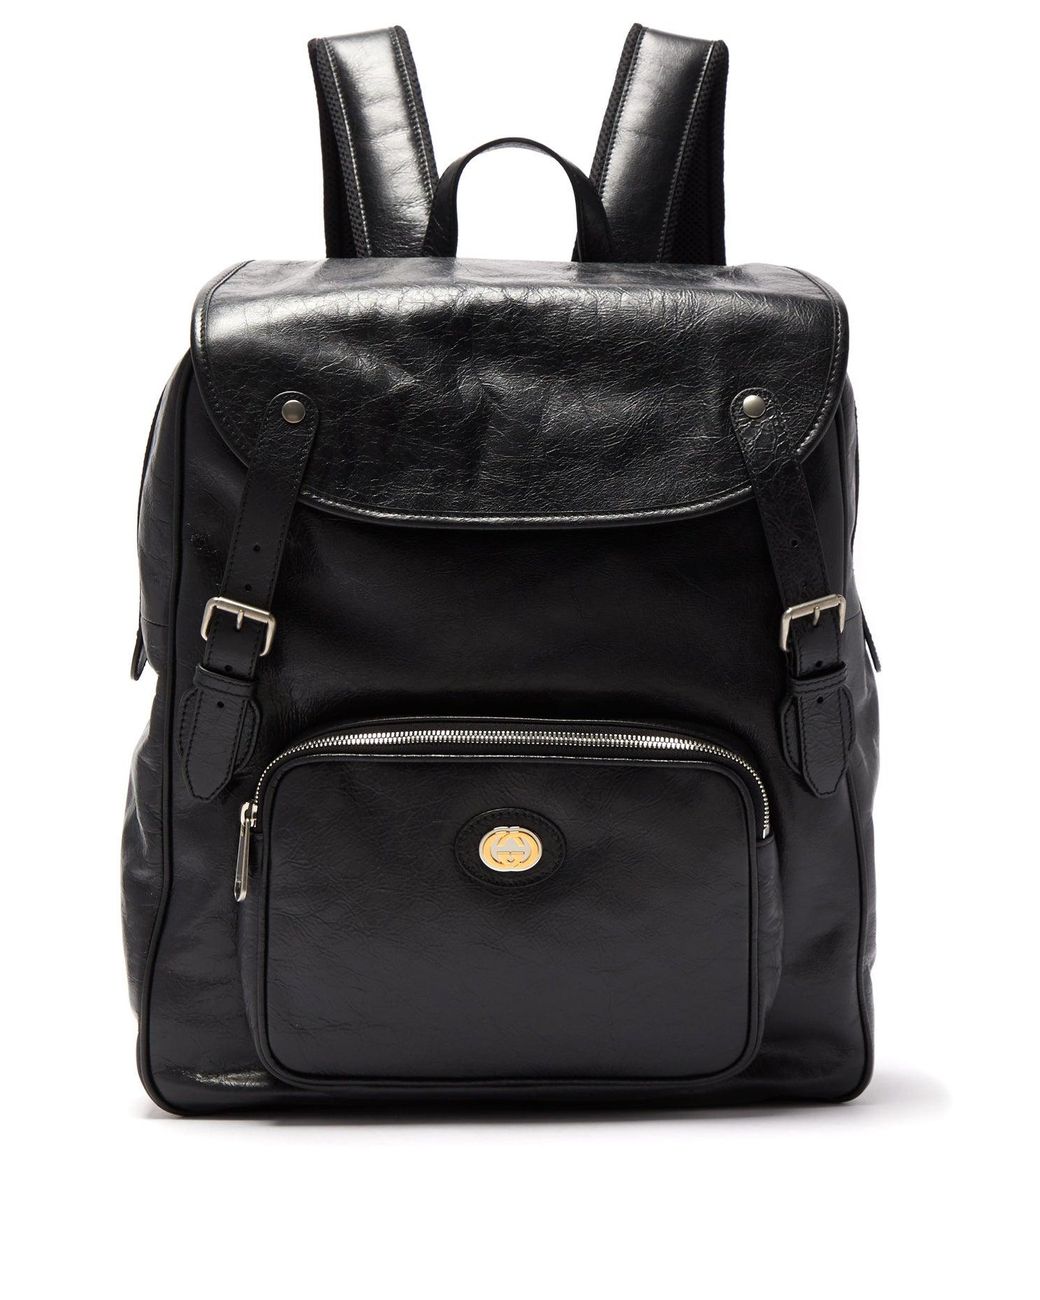 Gucci Morpheus Leather Backpack in Black for Men - Lyst